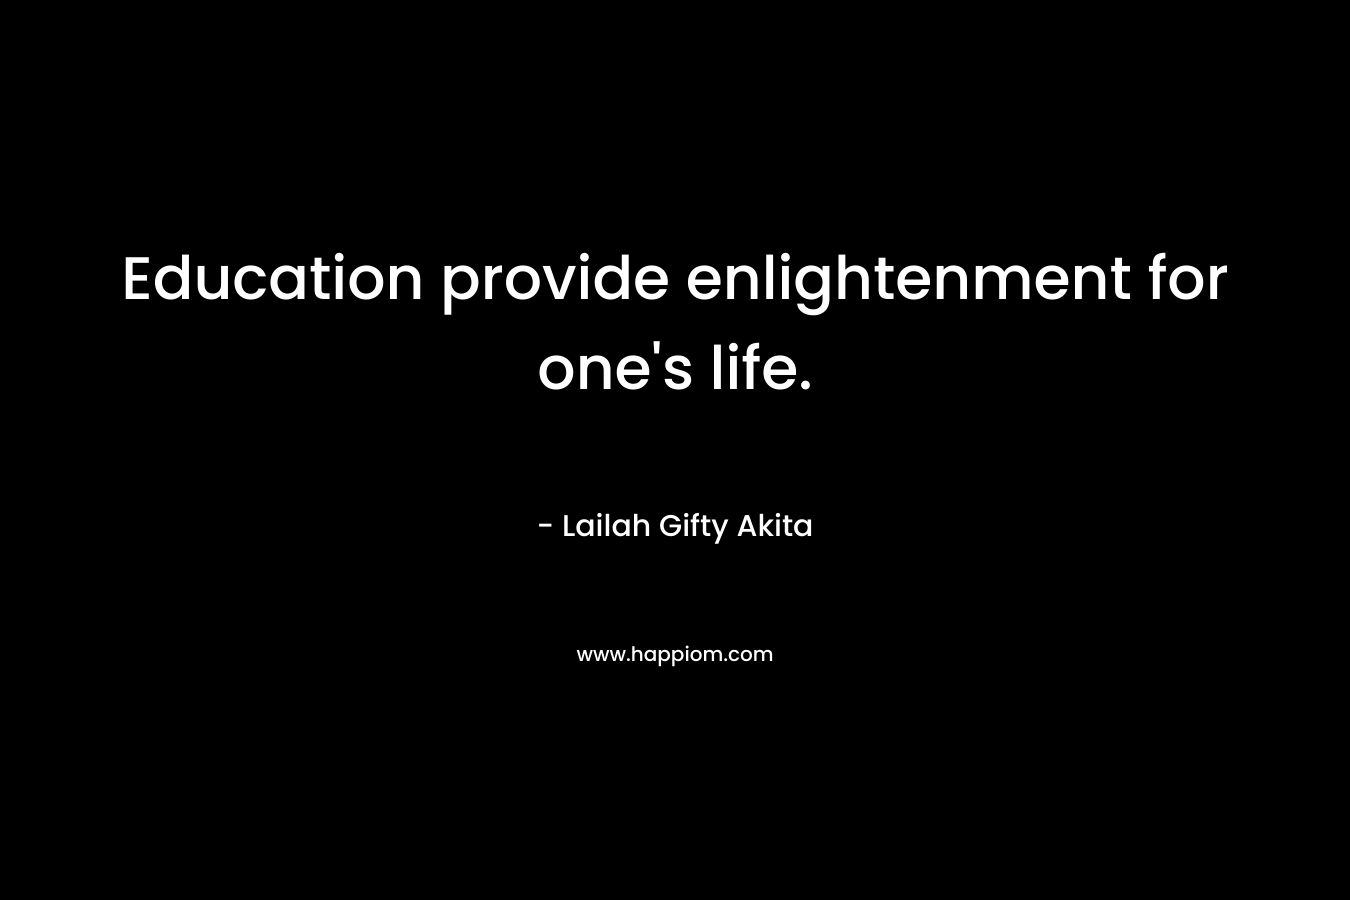 Education provide enlightenment for one's life.